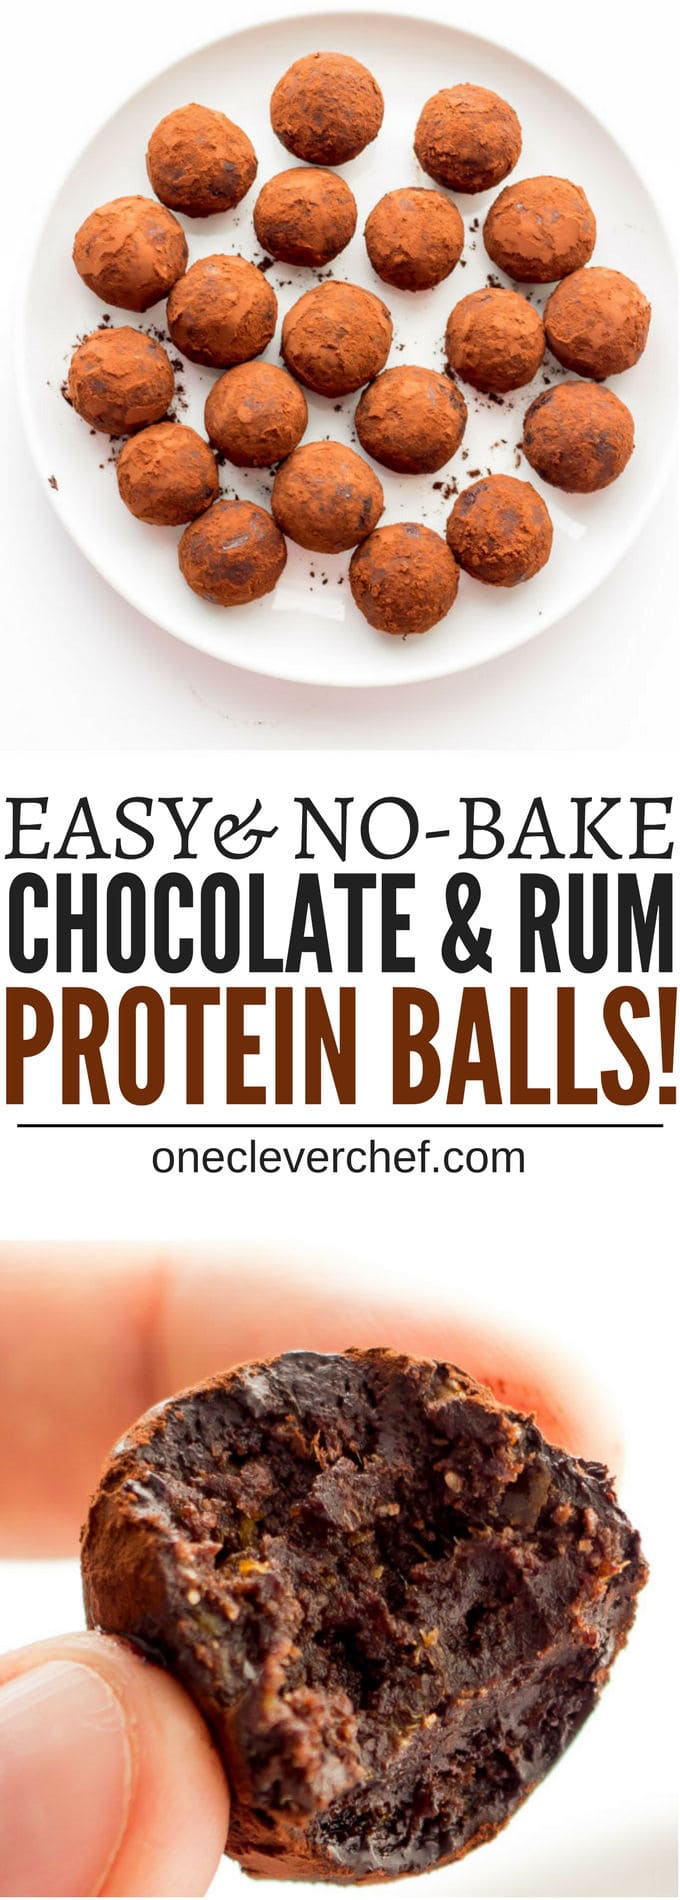 These Healthy Chocolate & Rum Balls are the perfect no-bake snack. They are easy to make, protein-packed and perfect either as a dessert or a post-workout lunch. Made in one bowl and ready under 15 minutes, theya re also paleo, vegan, gluten-free and dairy-free | www.onecleverchef.com